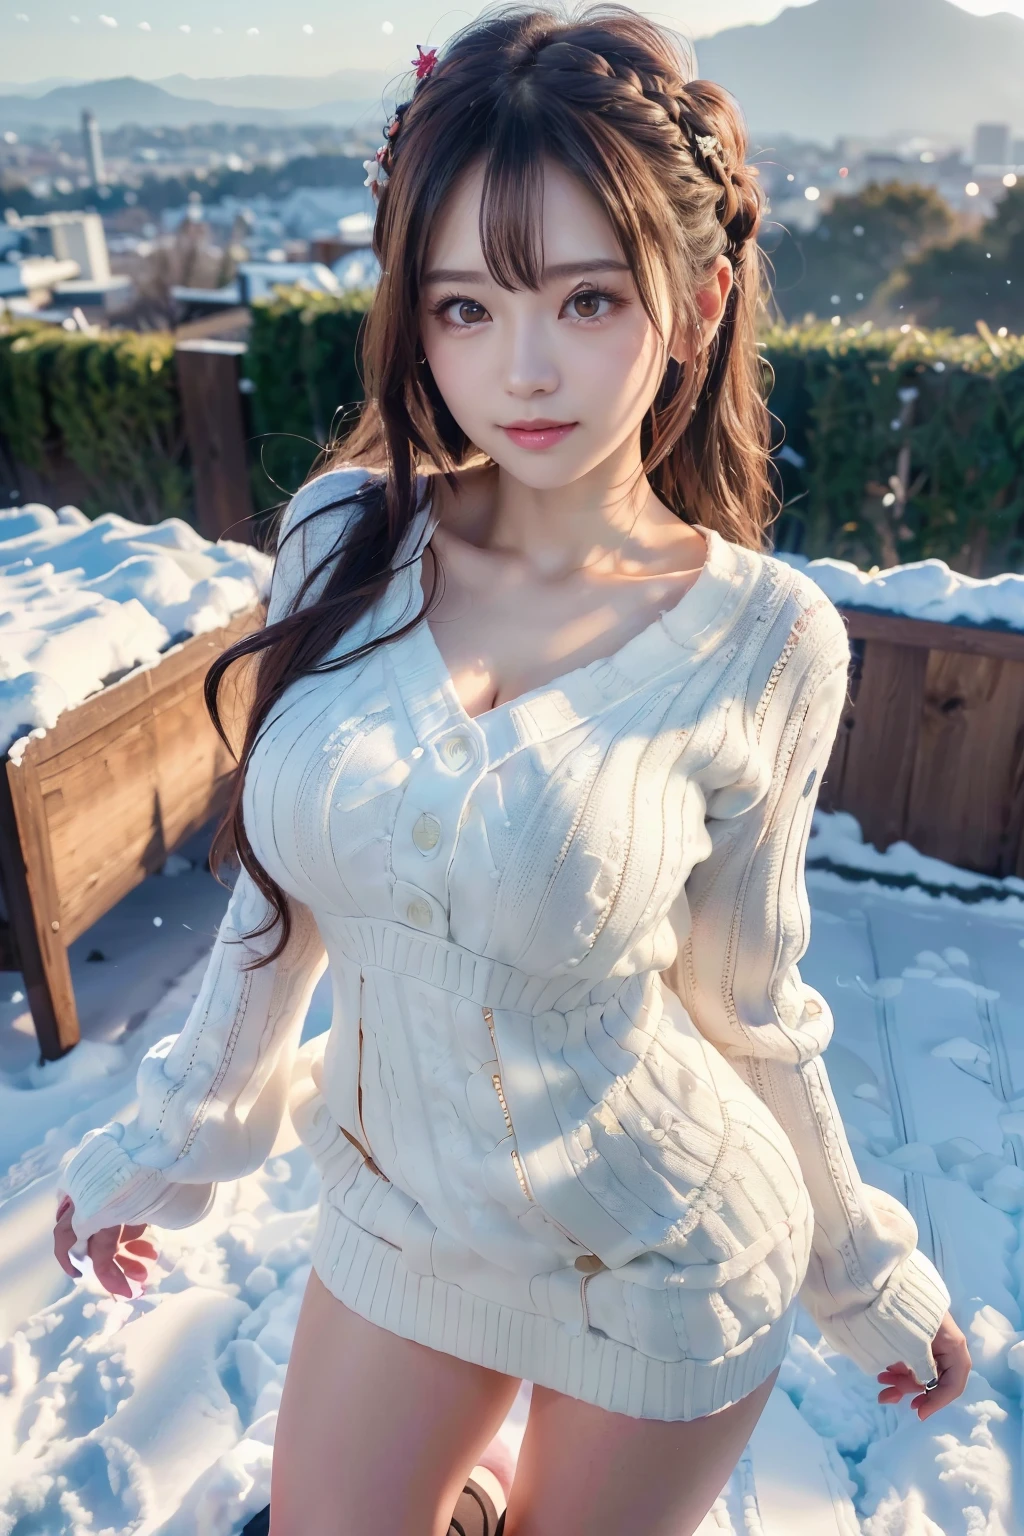 (Make your subject look three-dimensional with the contrast of light and shadow),(((With the sunset in the background))),(((standing on a snowy mountain in winter:1.3))),cute and beautiful adult woman,cute smile,with blushing cheeks,red lips,(((off-white knit jumper dress:1.3))),black stockings,Knee-high boots,(silvery hair,floral braided headband,half up、floral braided space bun,voluminous fishtail braid,Twisted pan,),(The bangs are see-through bangs),hairpin,hair ornaments,(((emphasize the chest:1.3))),Breast flick,Detailed clothing characteristics,Detailed characteristics of hair,detailed facial features,(dynamic angle),(dynamic and sexy pose),professional lighting,cinematic light,(highest quality,Ultra high resolution output image,) ,(8K quality,Depth of the bounds written,Anatomically accurate facial structure,),(sea art 2 mode:1.3),(Image mode Ultra HD,),(3D Realistic Photography:1.3)